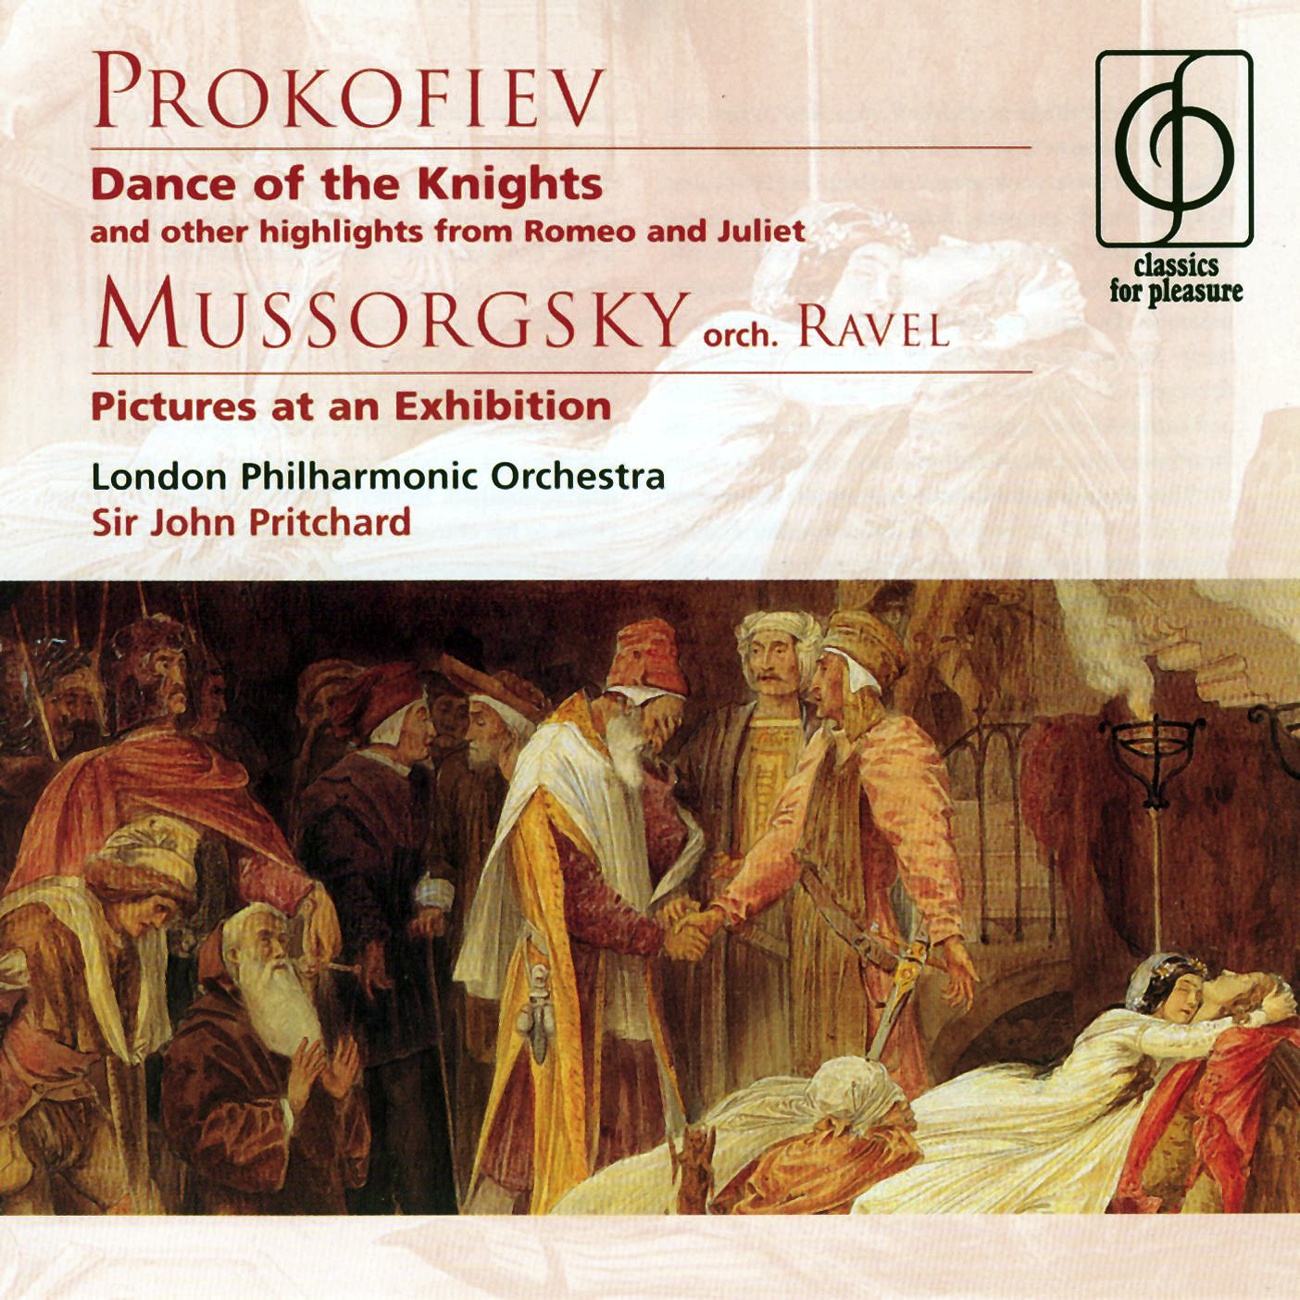 Pictures at an Exhibition (orch. Ravel) (1970 Digital Remaster): Two Old Jews (Goldenberg and Schmuyle)